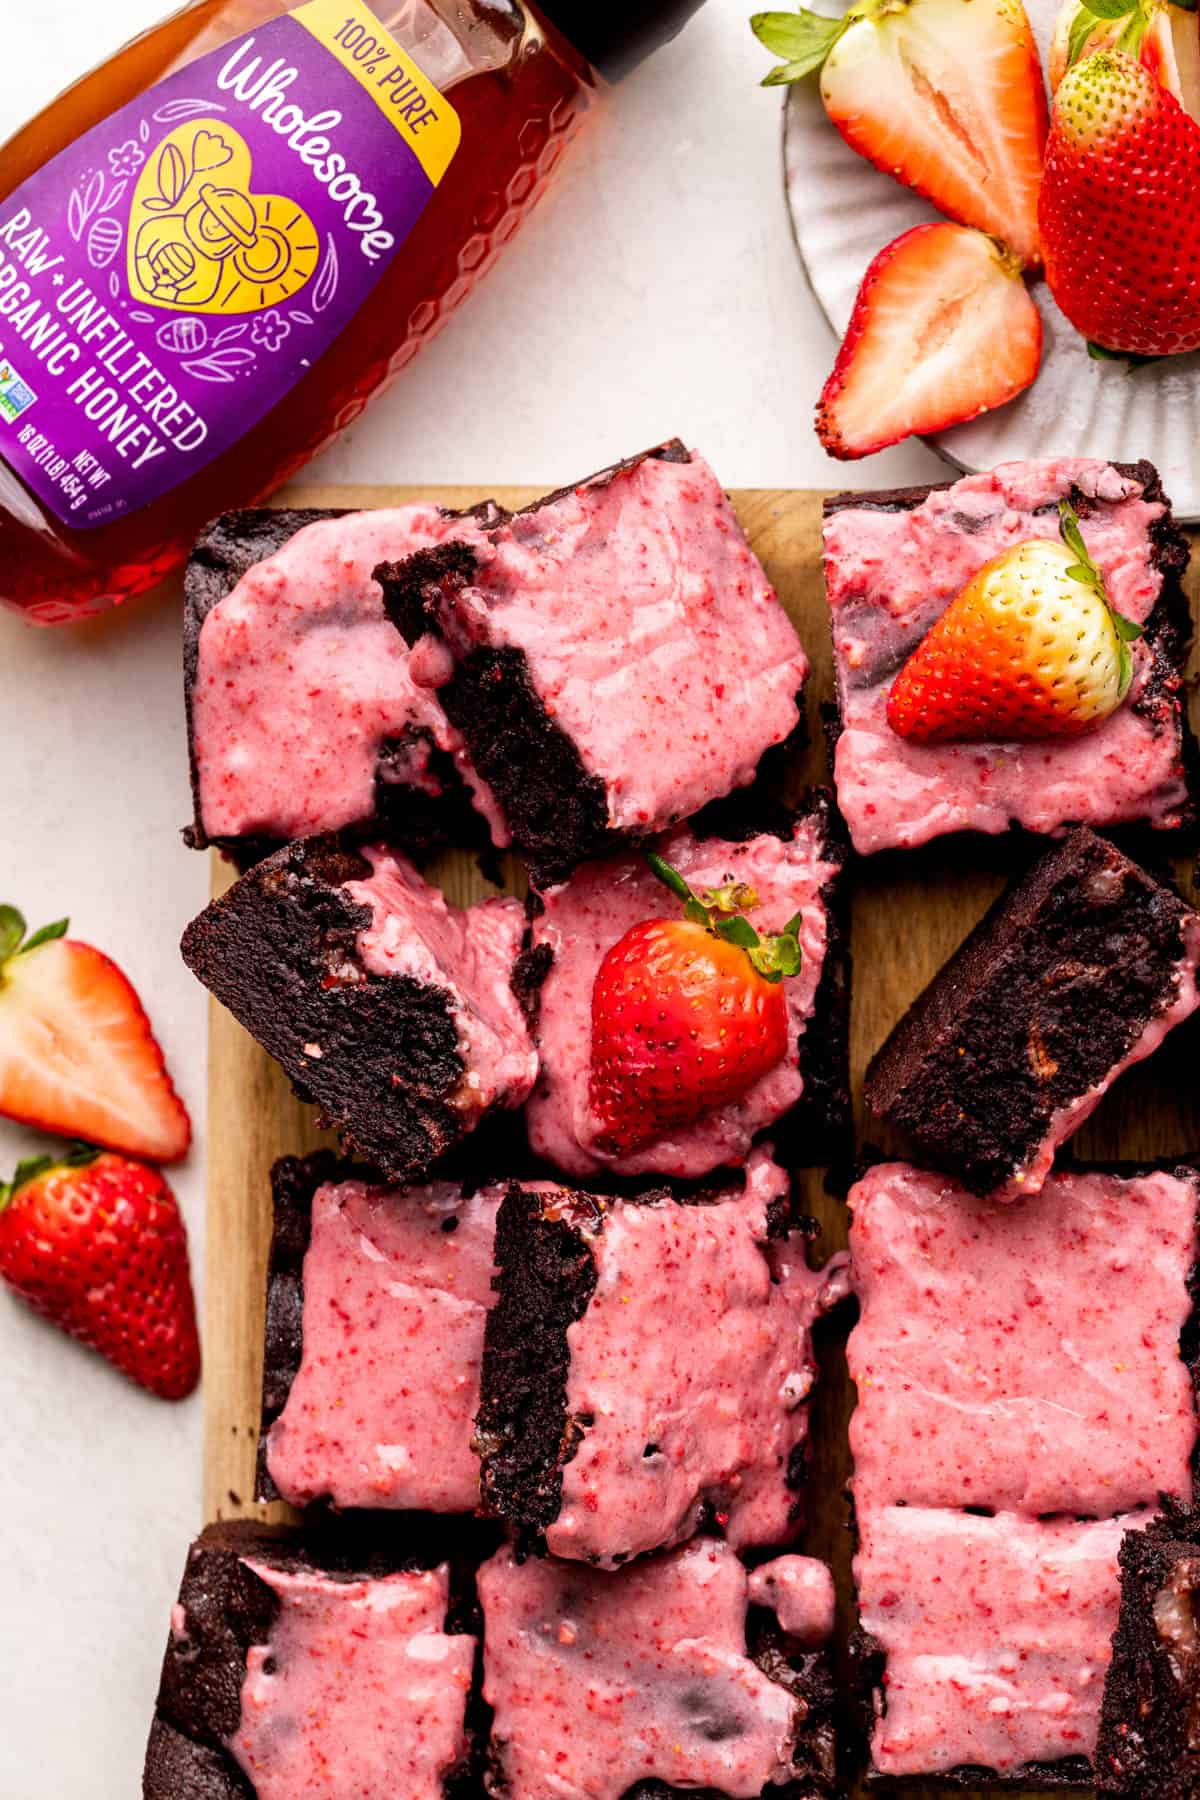 Strawberry brownies on a wood board.